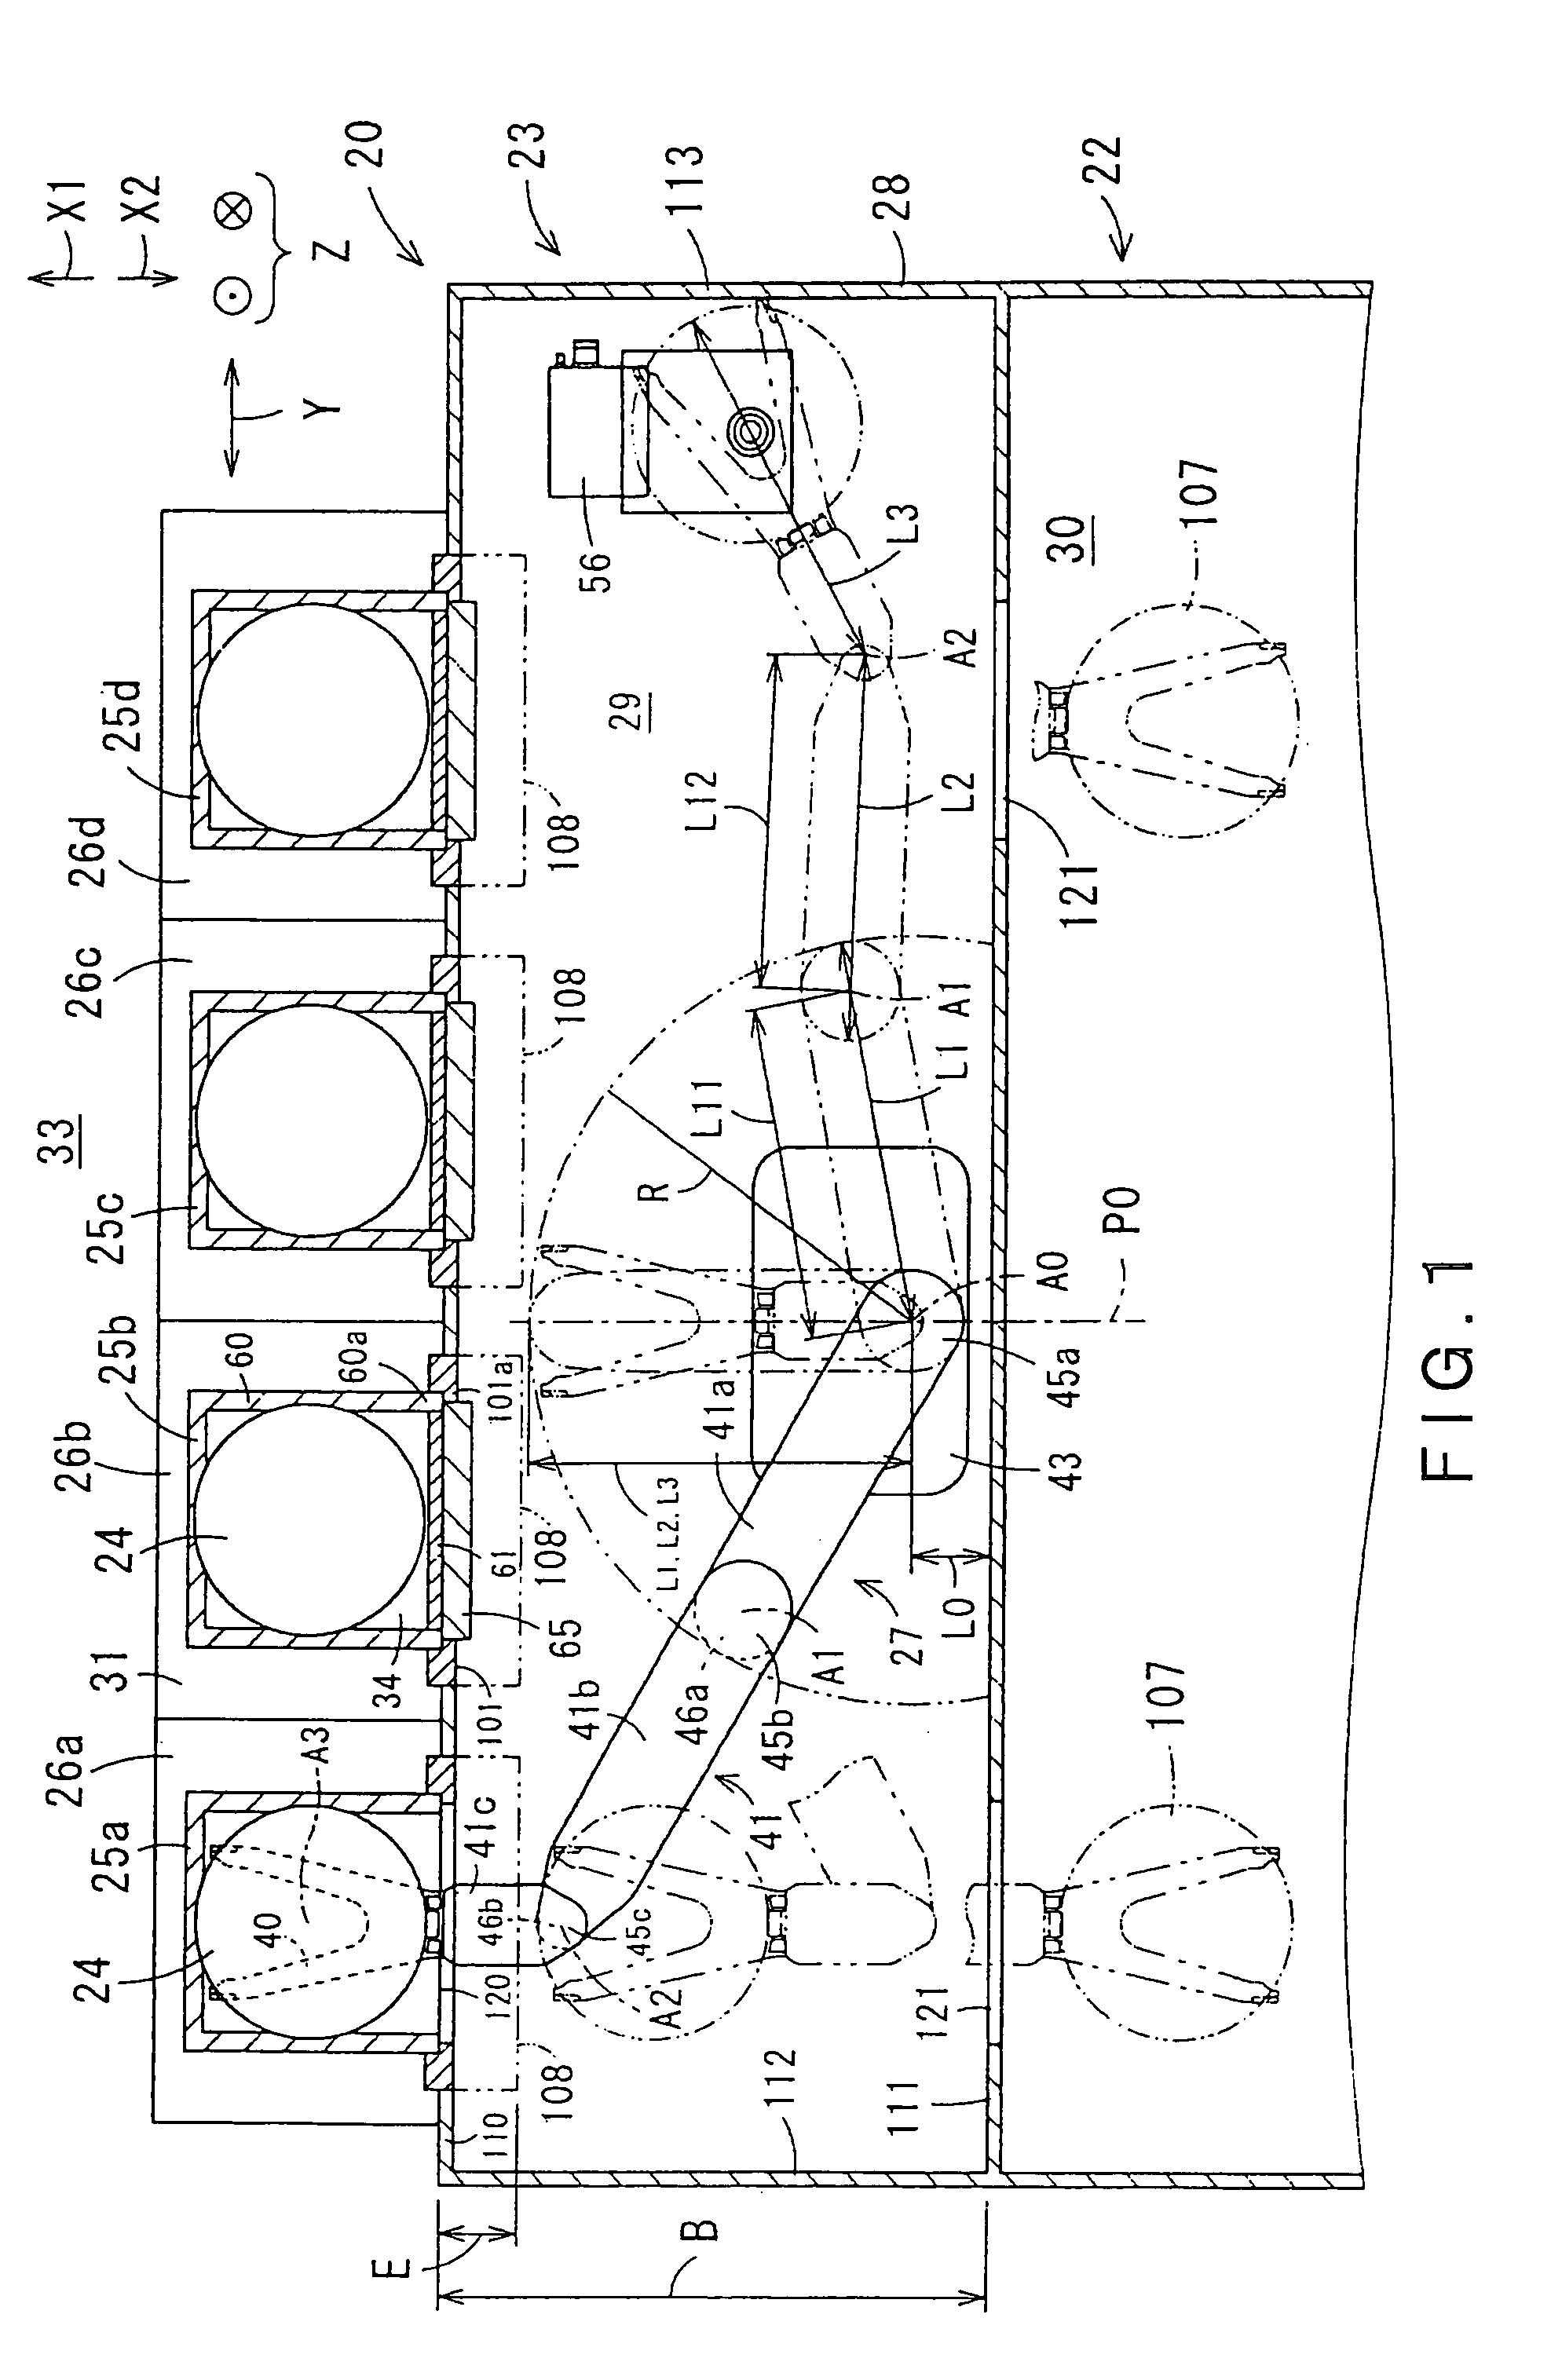 Wafer transfer apparatus and substrate transfer apparatus